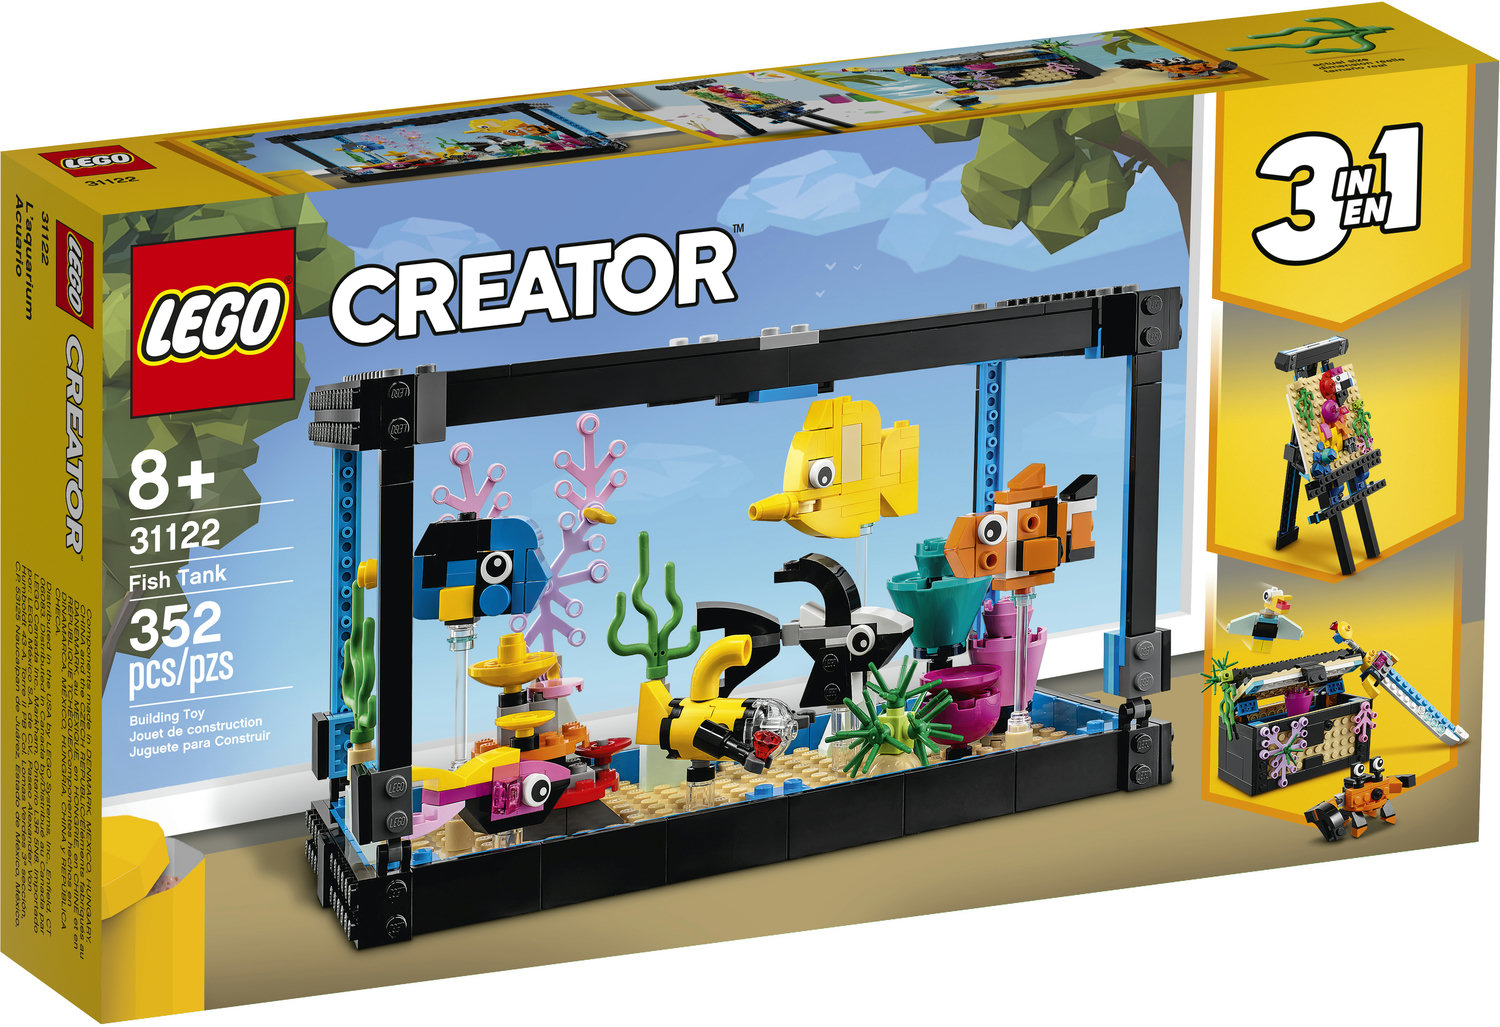 LEGO Creator 3in1 Fish Tank 31122 BuildingToy; Great Gift for Kids (352 Pieces) - image 4 of 10